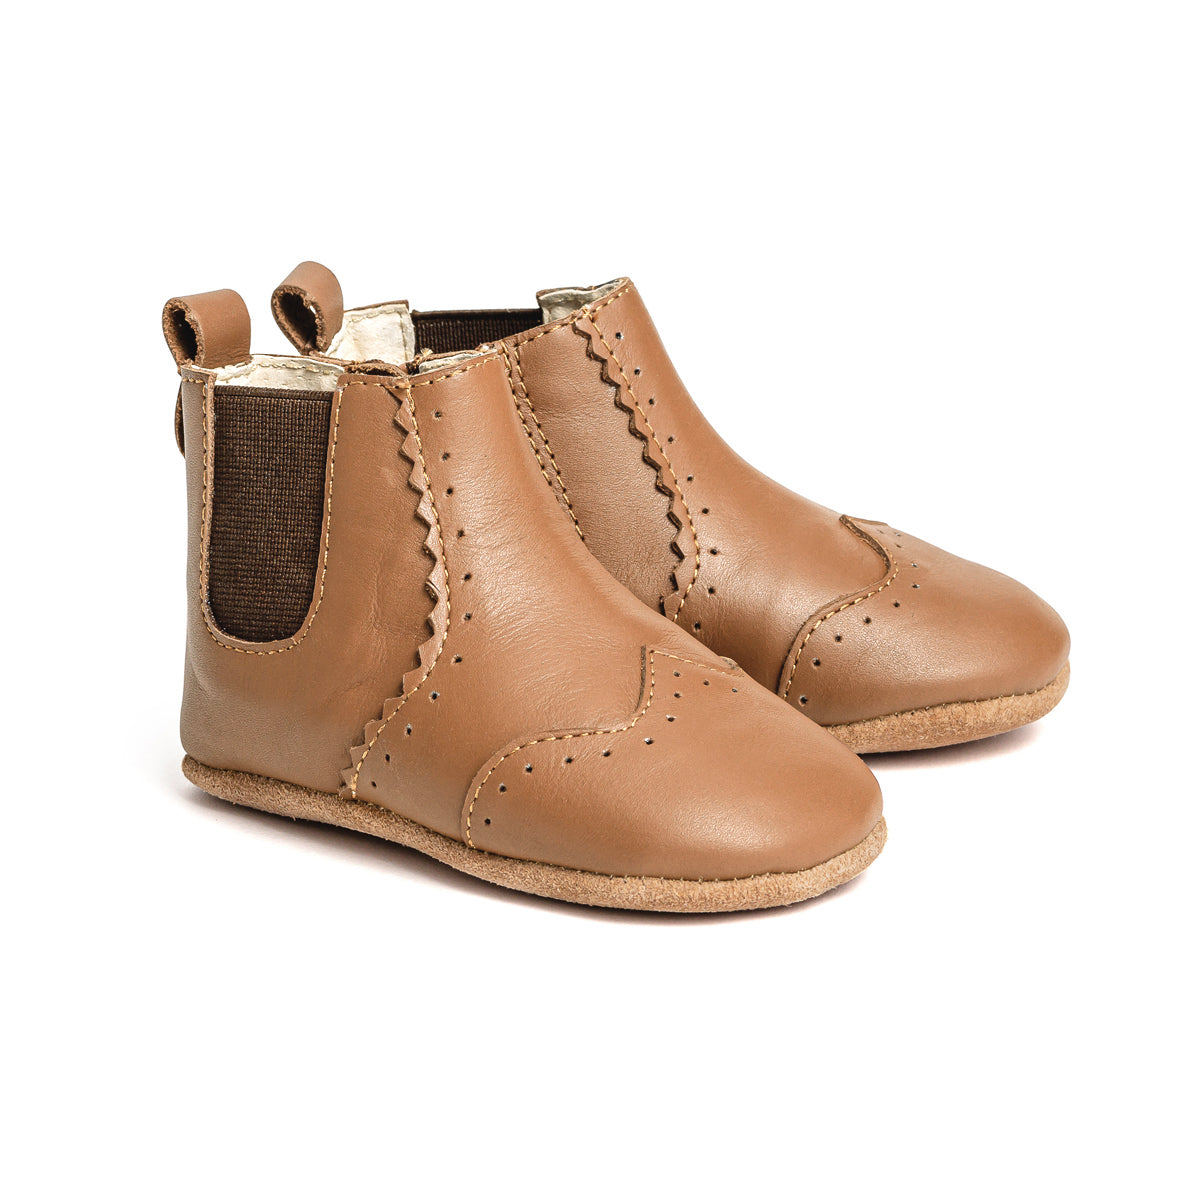 Pair of baby windsor boots in colour Tan